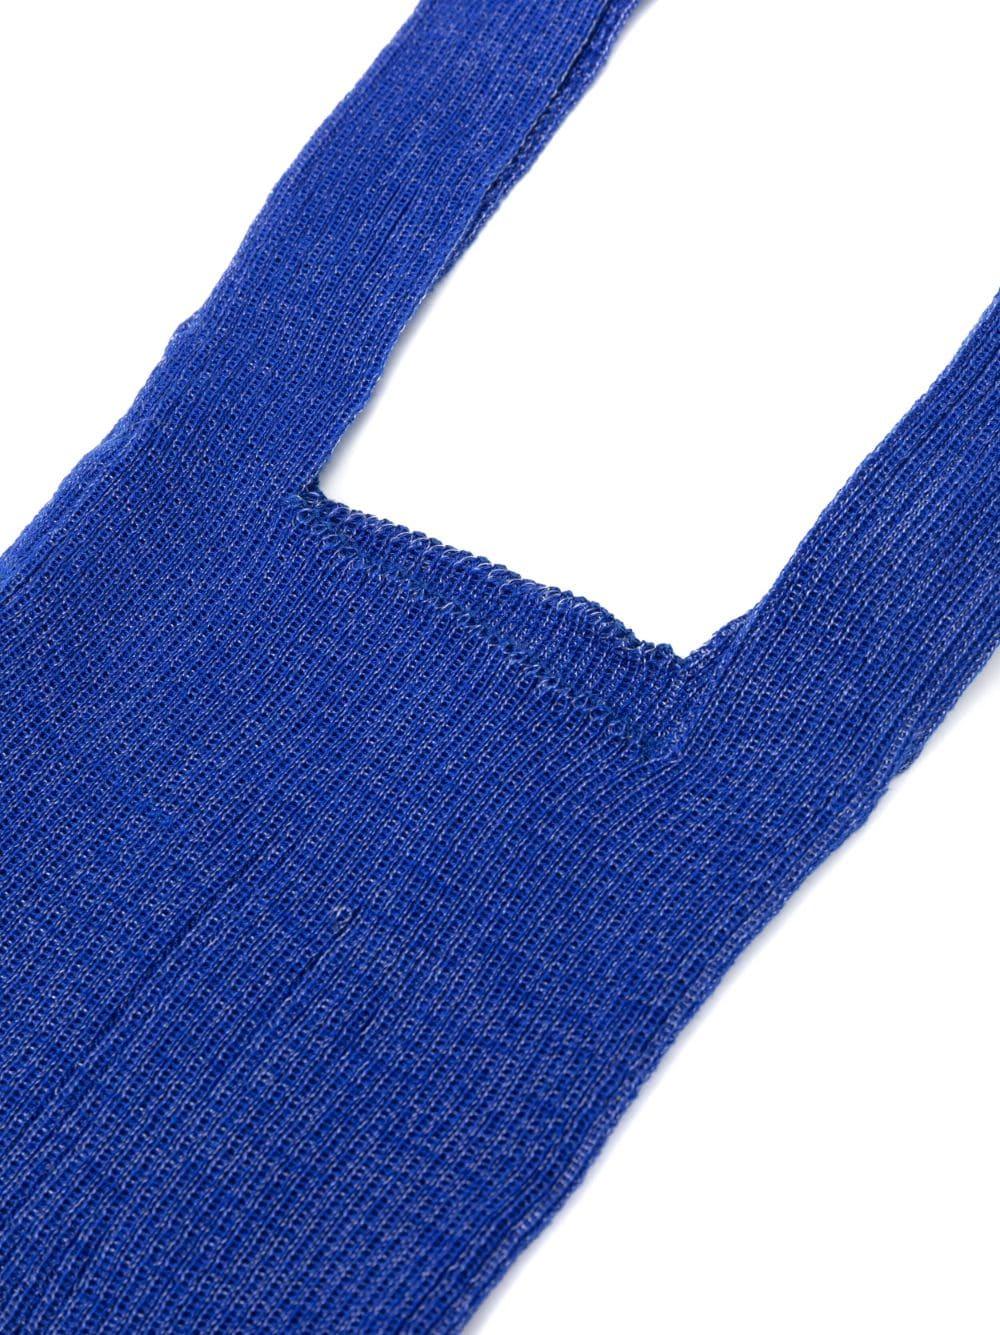 a. roege hove Large Emma Knitted Tote Bag in Blue | Lyst